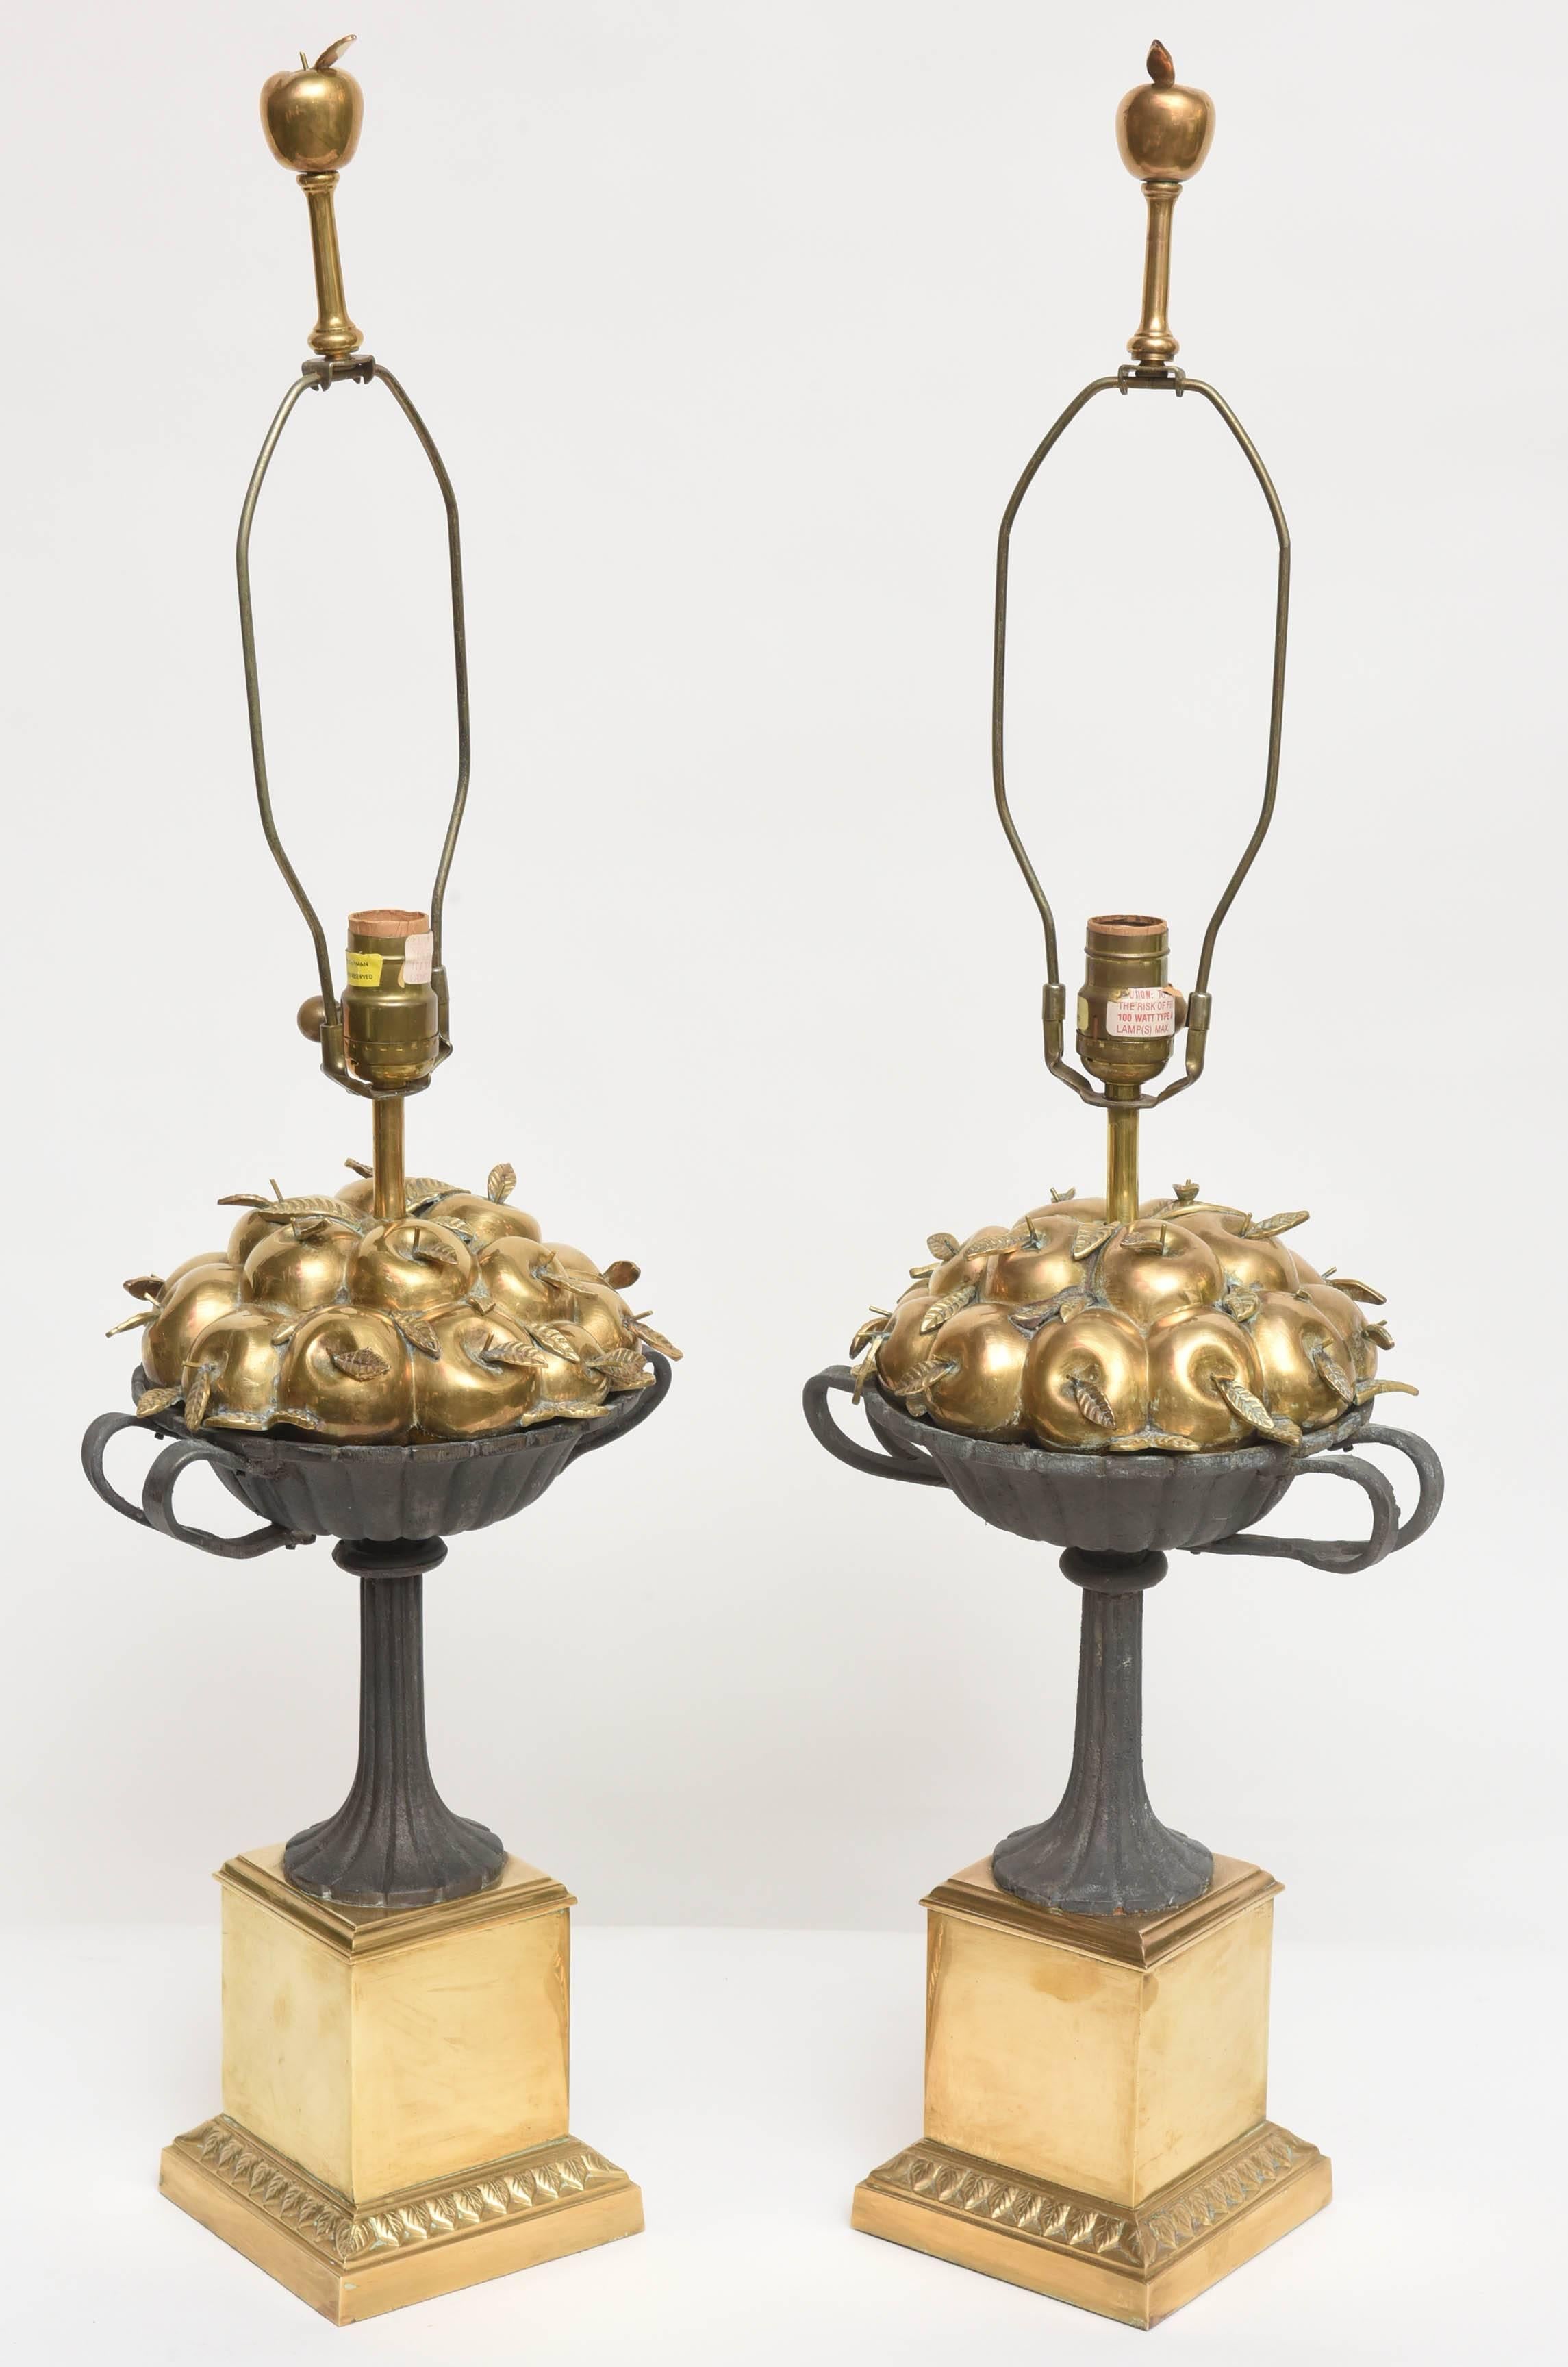 Wonderful and whimsical pair of brass lamps with brass apples in an iron handled basket. Brass base and brass apple finials. Sold with out shades. By Chapman.